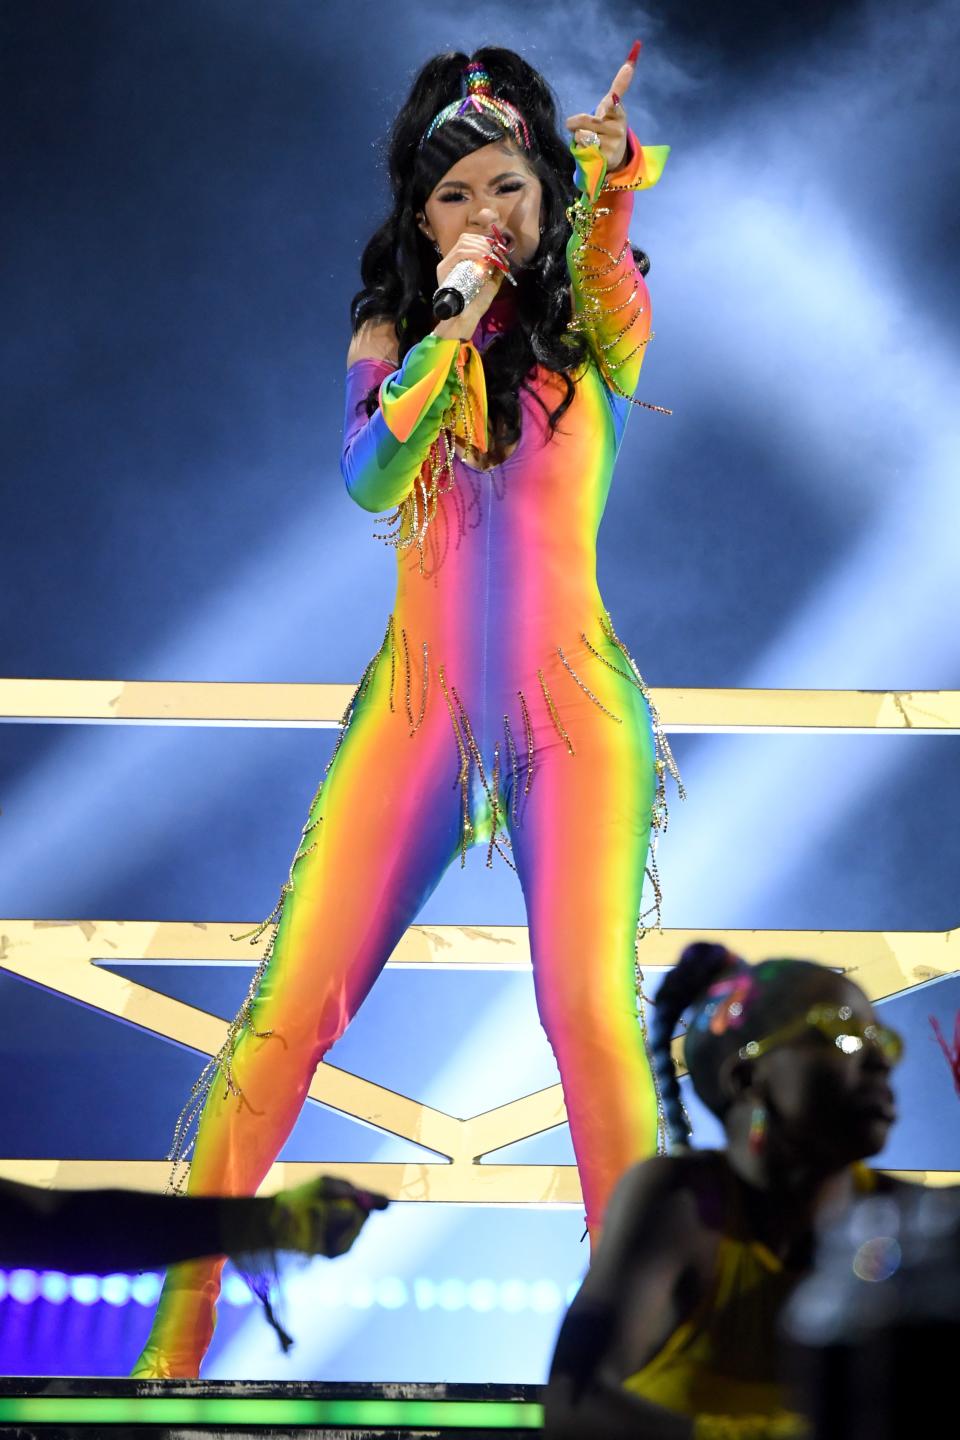 PHILADELPHIA, PENNSYLVANIA - AUGUST 31: Cardi B performs onstage during Made In America - Day 1 at Benjamin Franklin Parkway on August 31, 2019 in Philadelphia, Pennsylvania. (Photo by Kevin Mazur/Getty Images for Roc Nation)